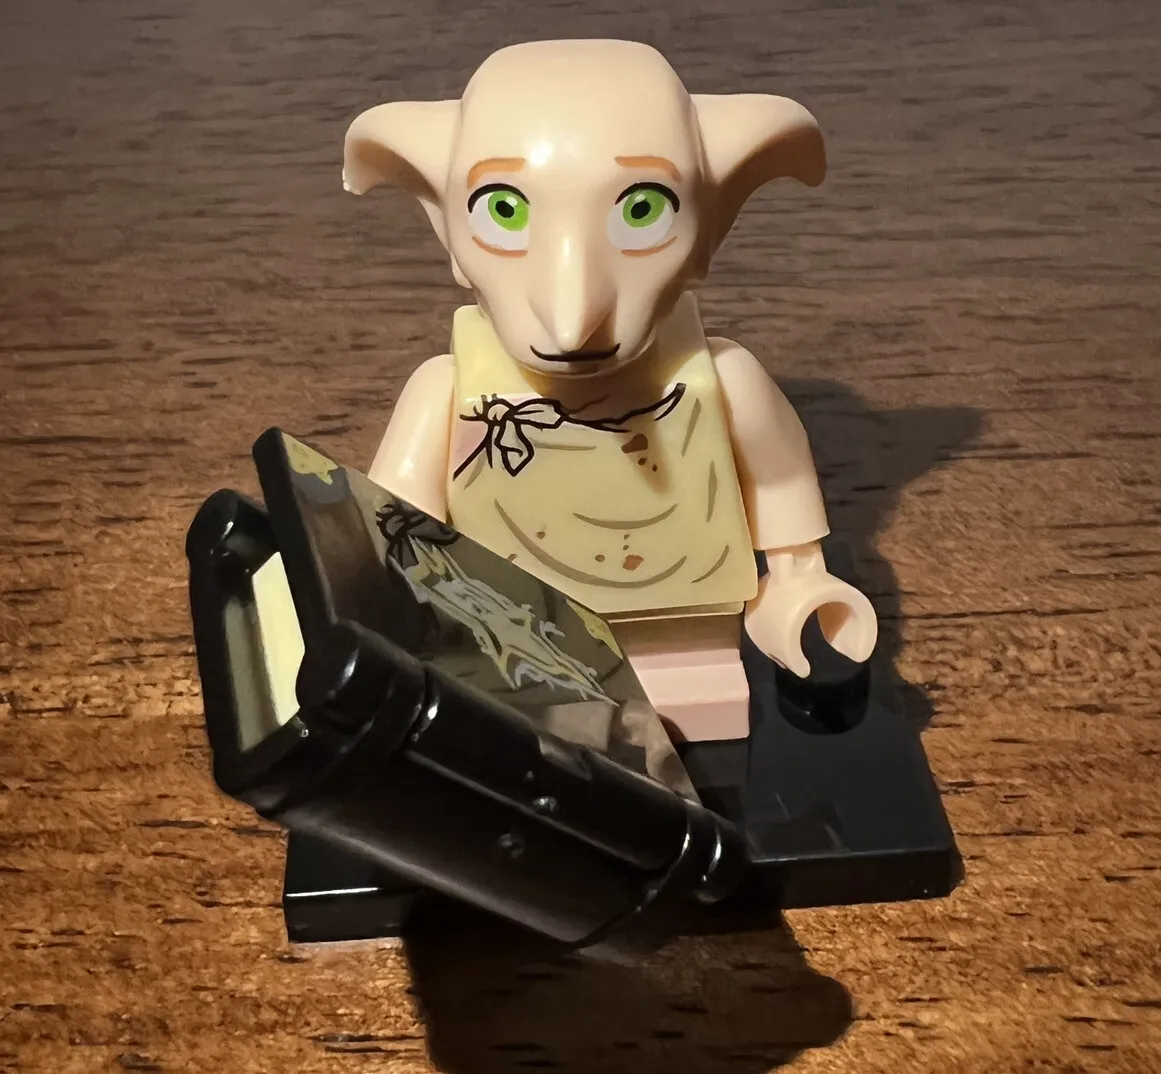 Lego Harry Potter Minifigure Series 1 Dobby the Elf Complete W Base 71022  RARE